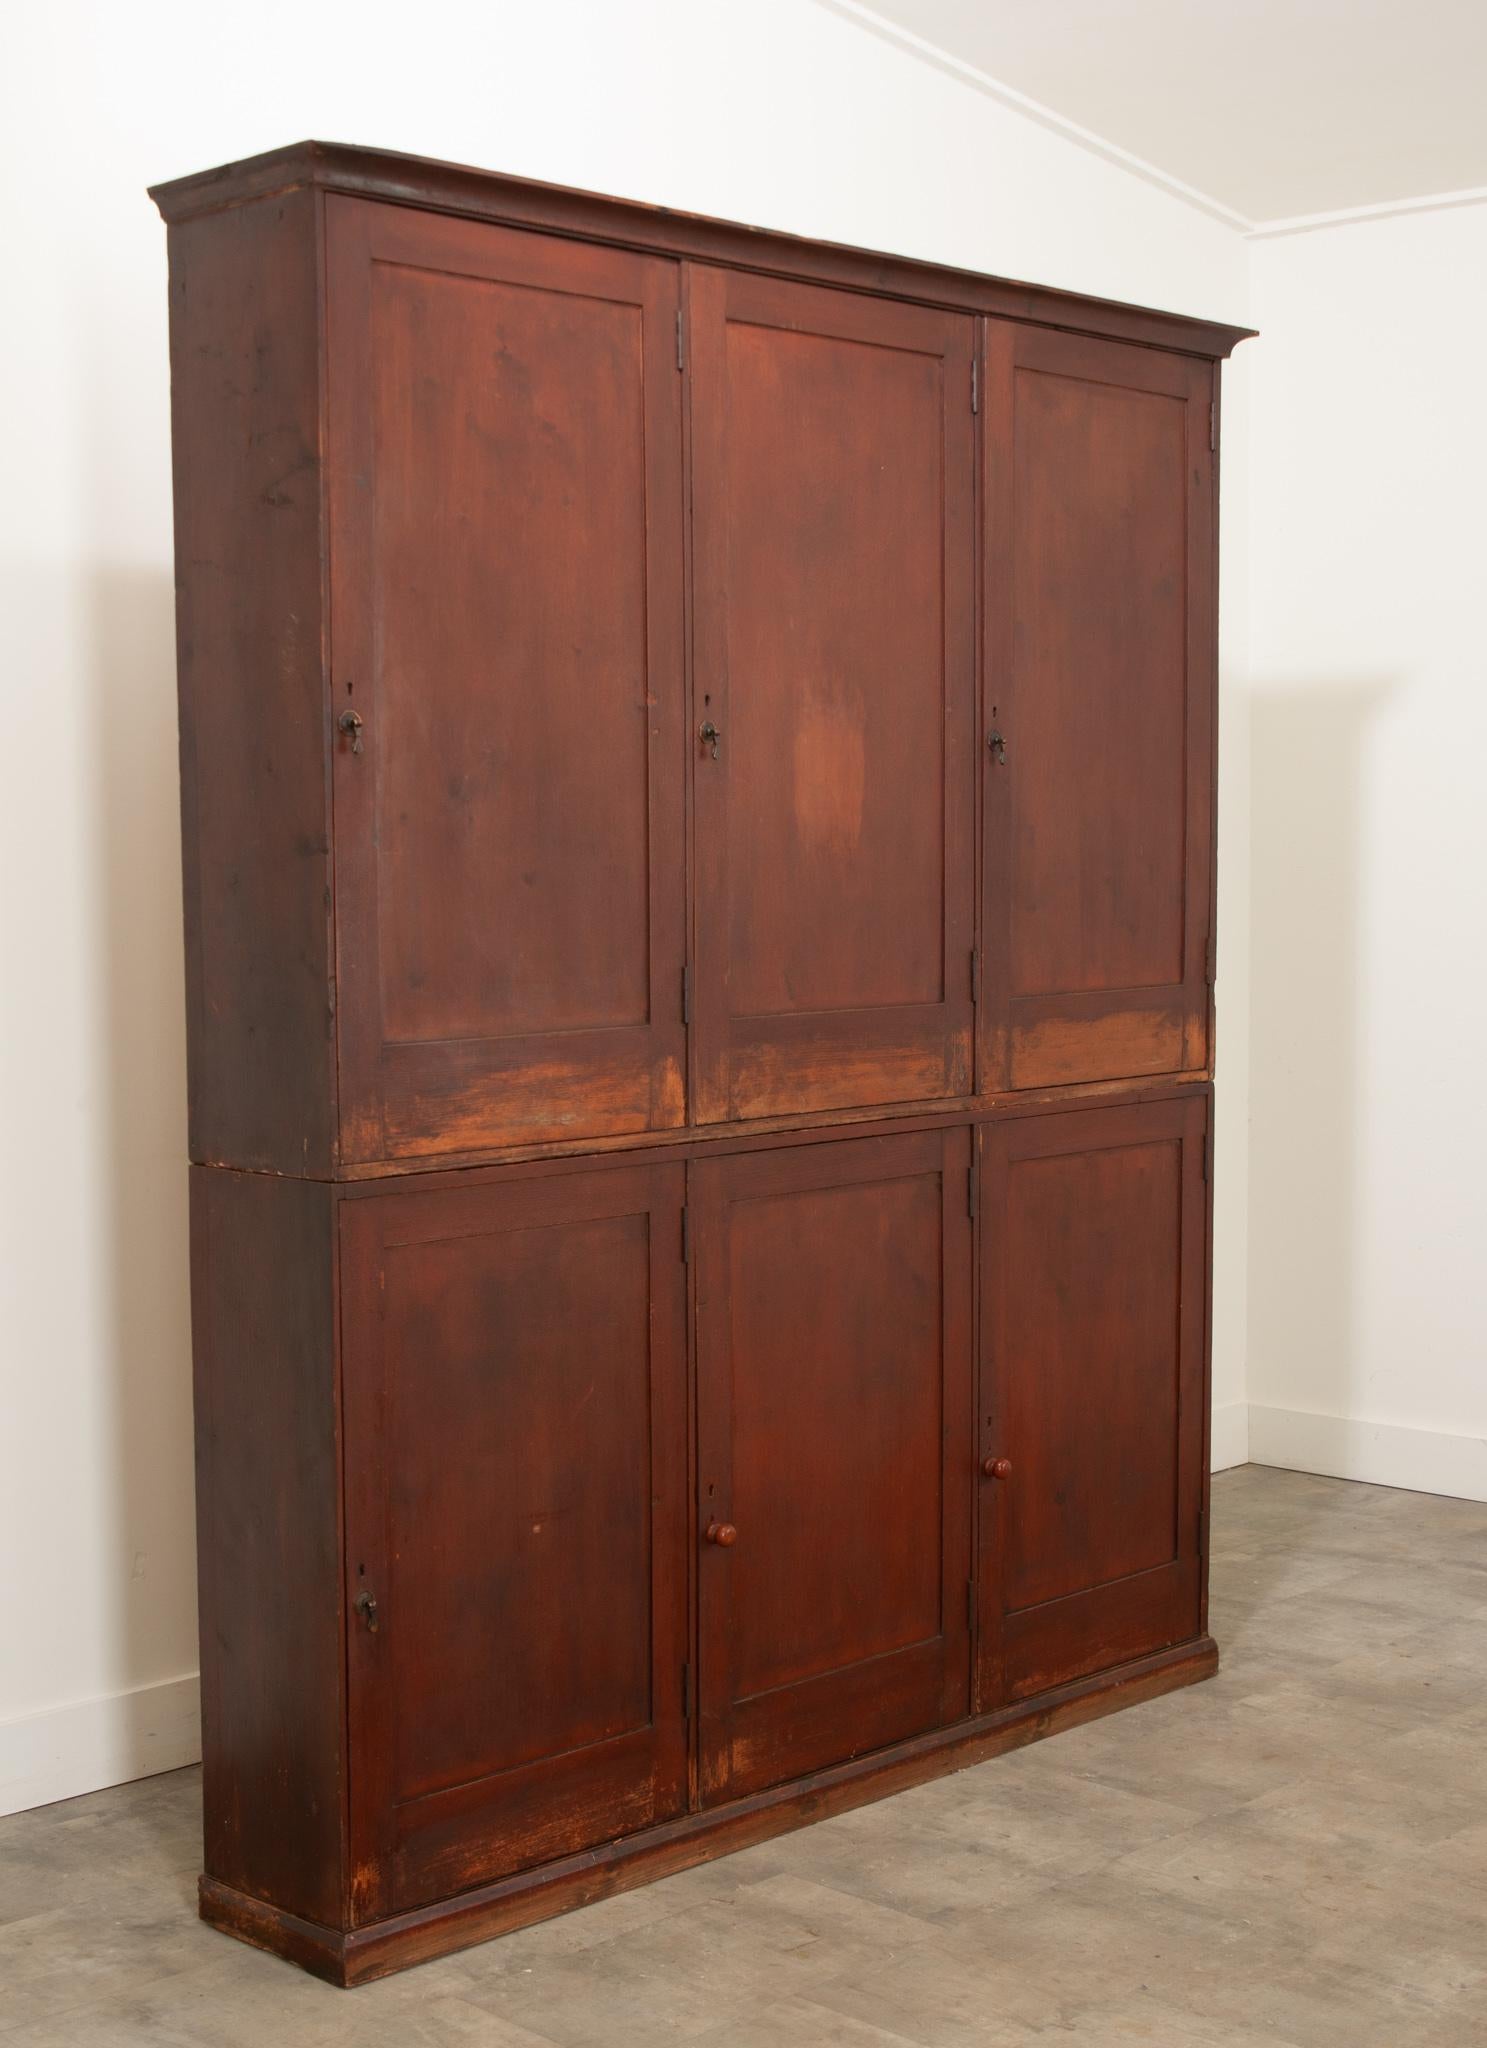 A unique 19th century butler’s pantry made in England circa 1860. Beautifully crafted of English pine, these Victorian era cupboards provide abundant storage with classic style. Featuring sets of three upper and lower cabinets with plenty of